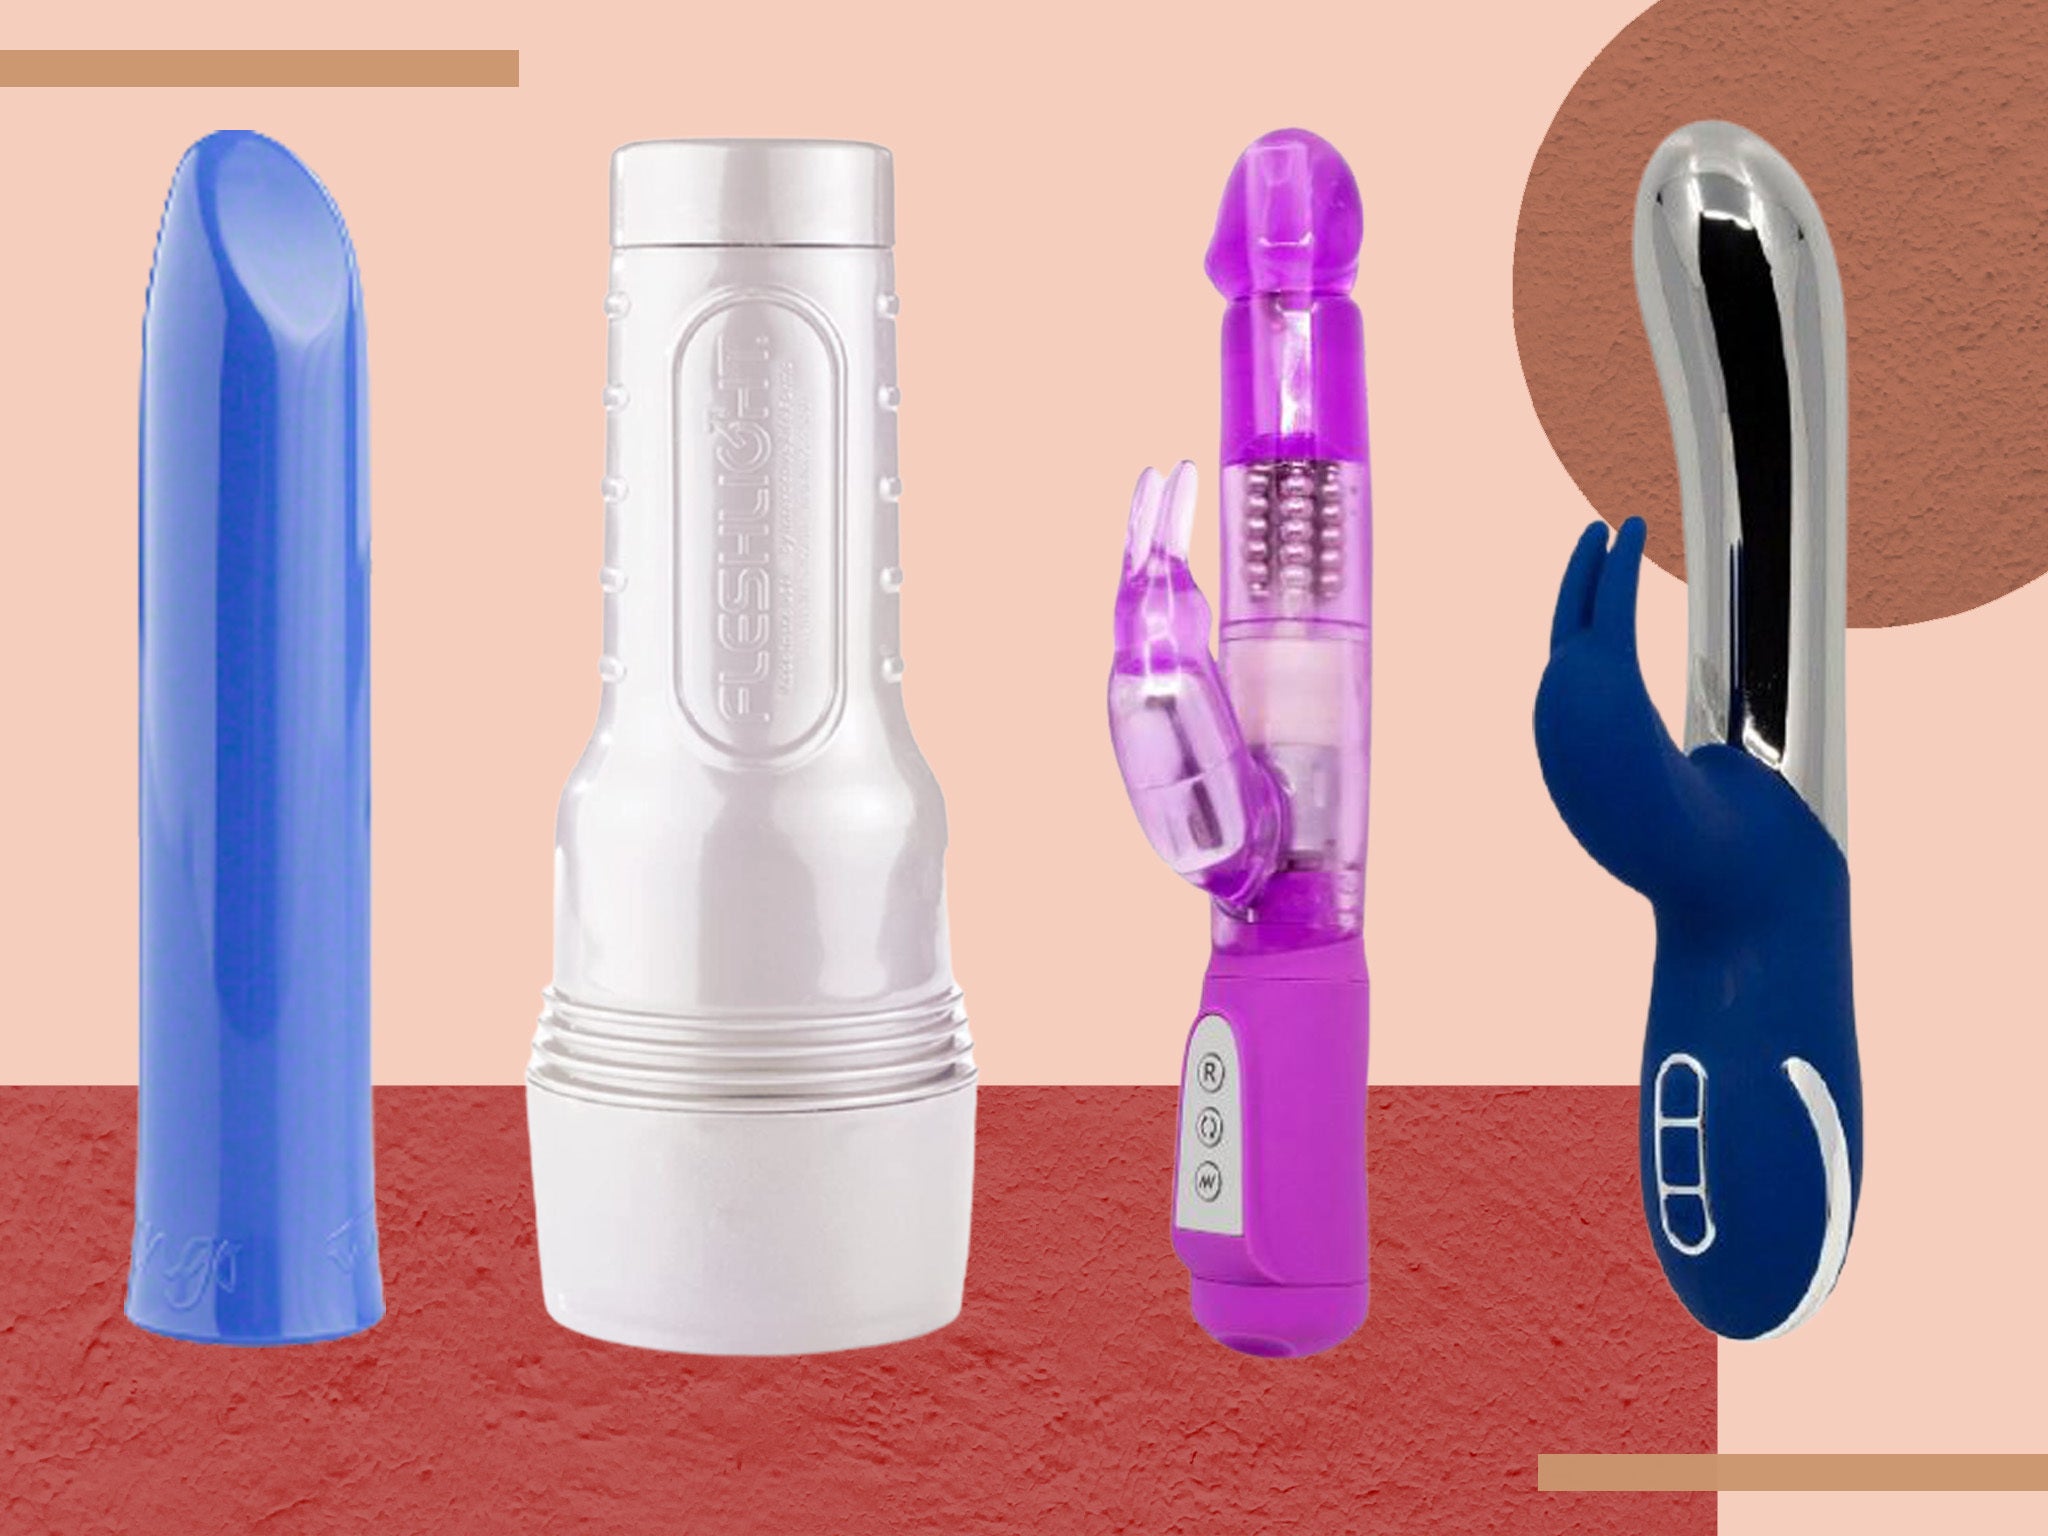 Objects Used As Sex Toys